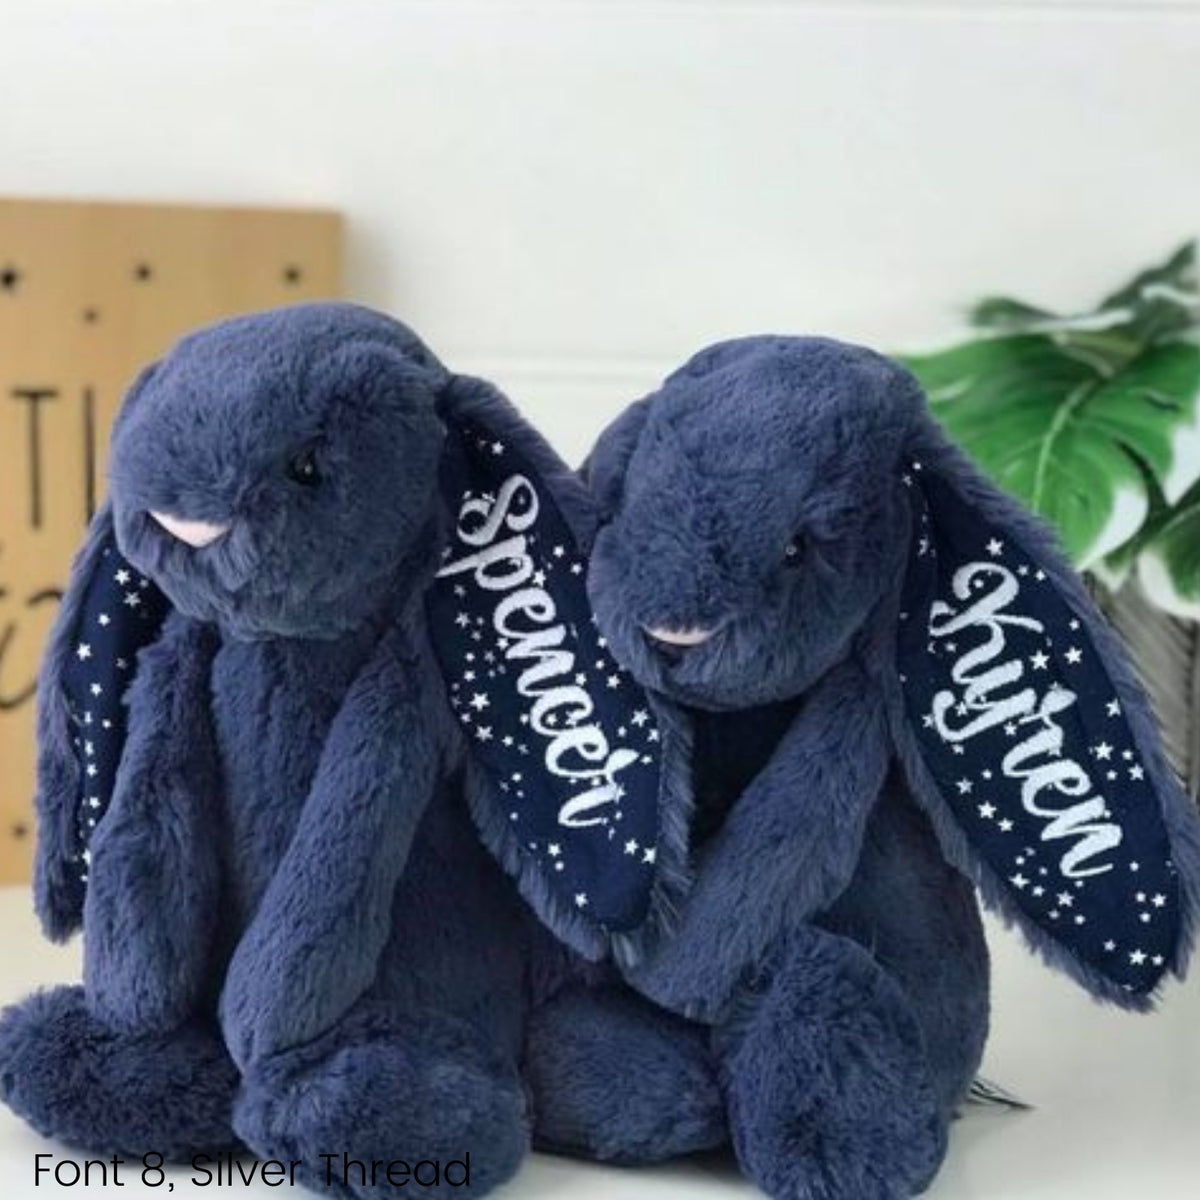 Personalised Jellycat Bunny Australia NZ Perth Stardust Navy Blue Name on Ear